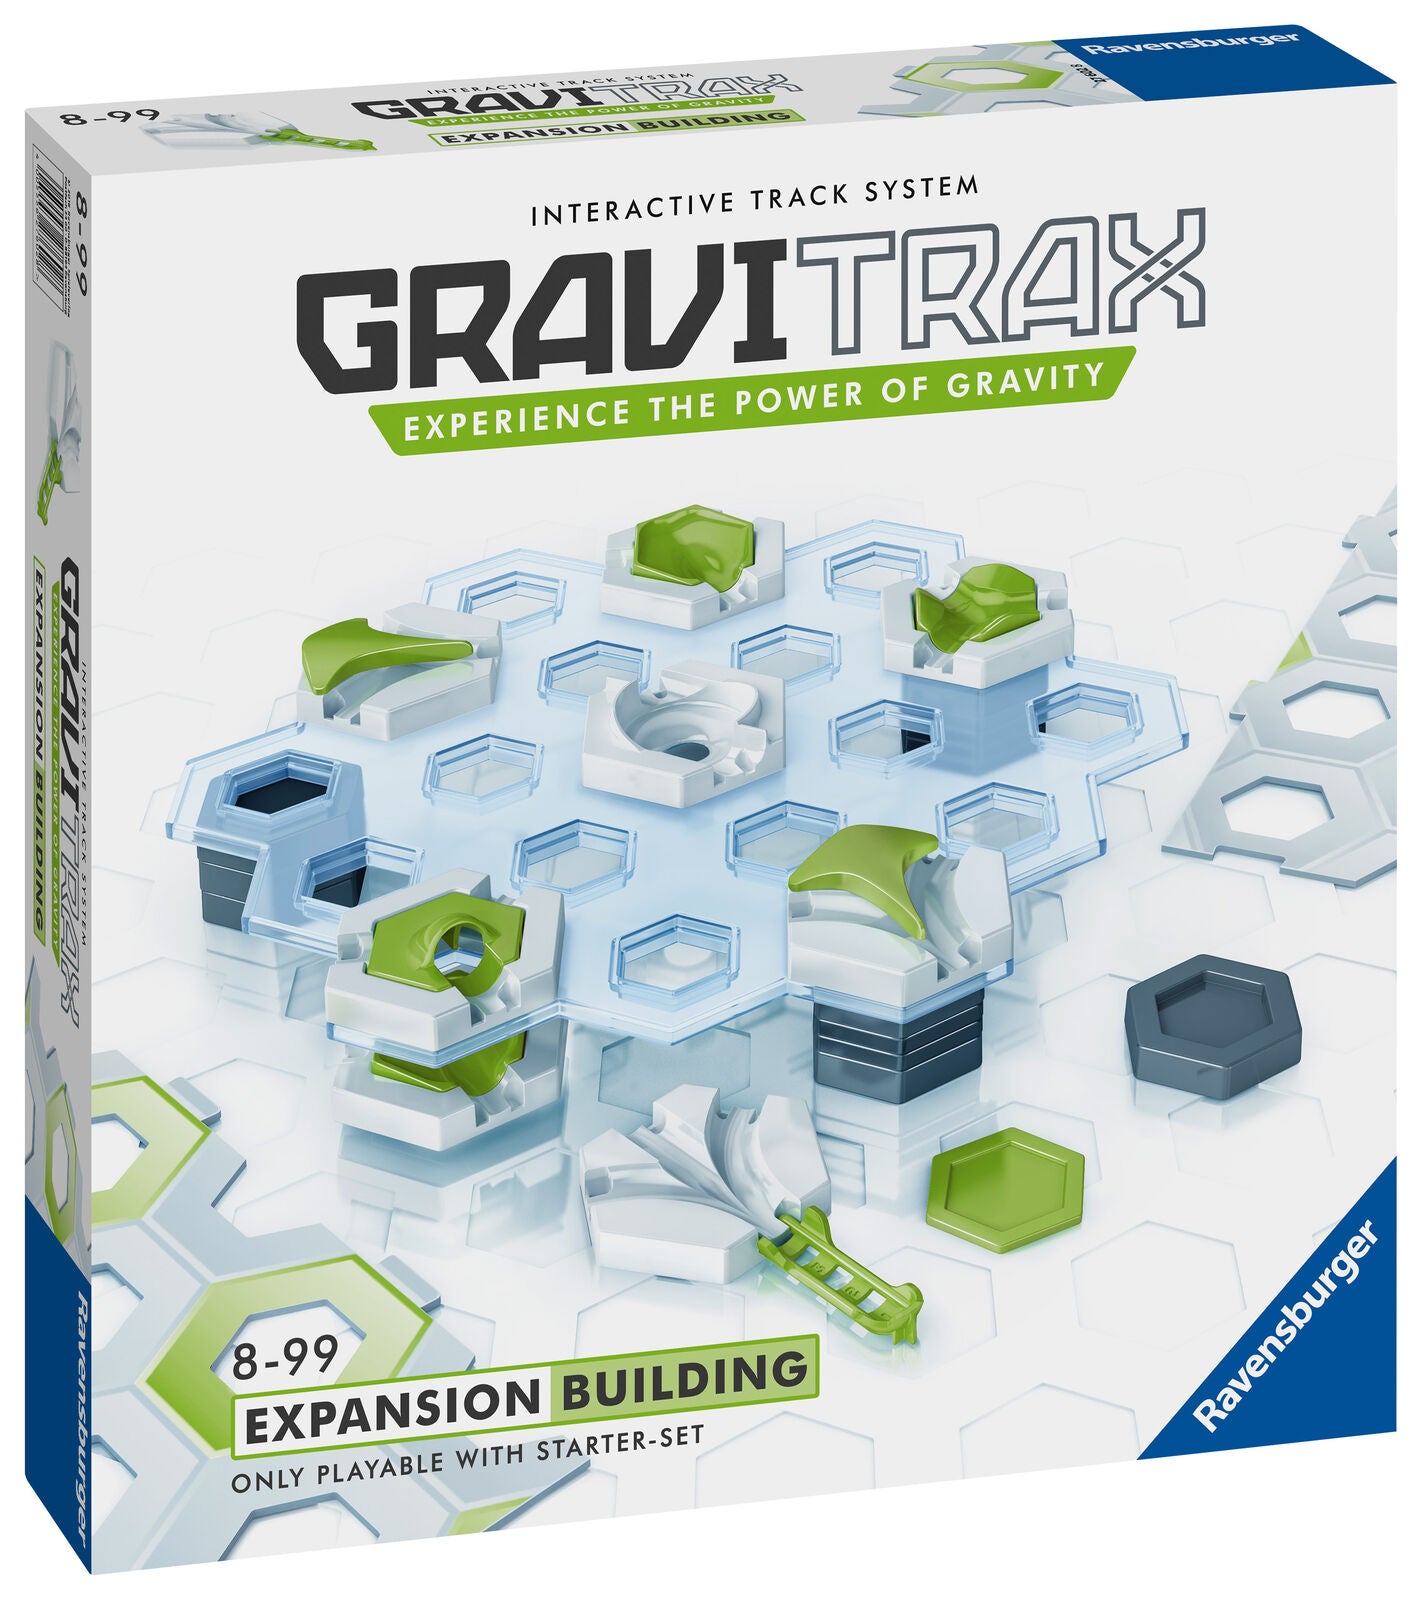 27602 Ravensburger Gravitrax Add on Building Pack Games Toys Age 8+ Years